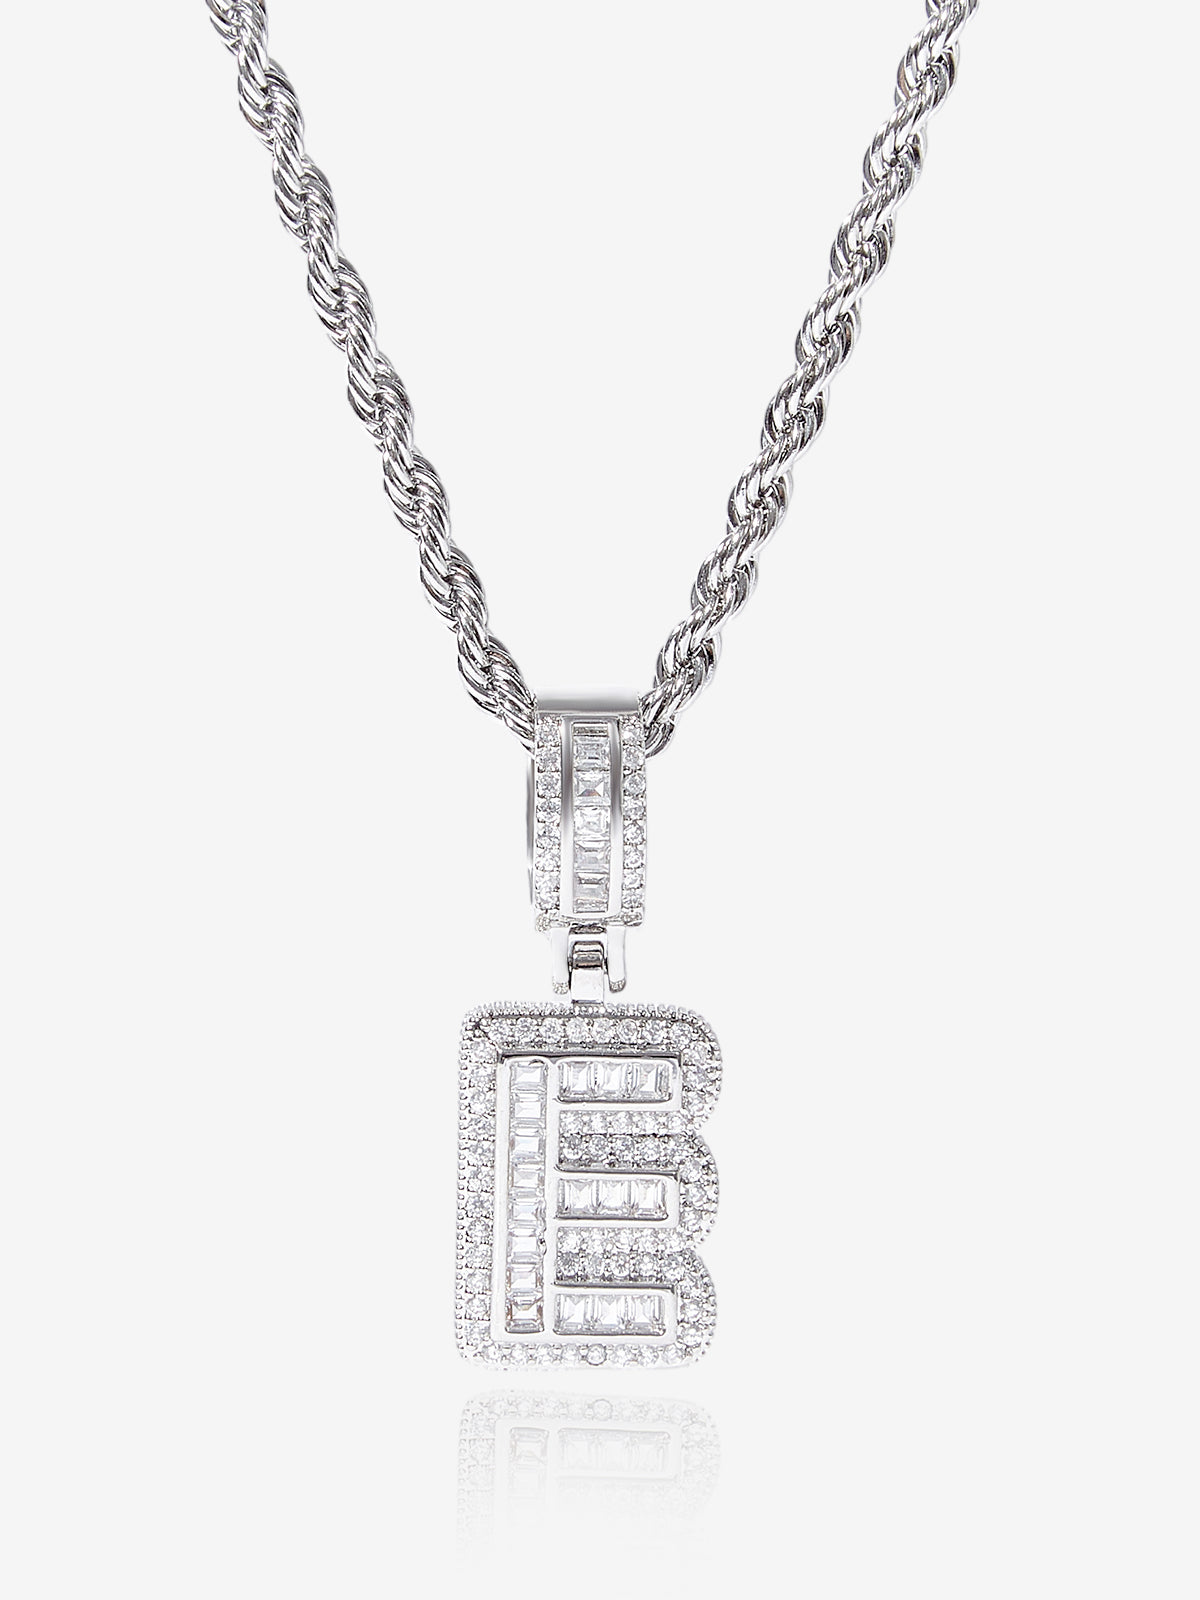 NOISSEY Full Pave Necklace